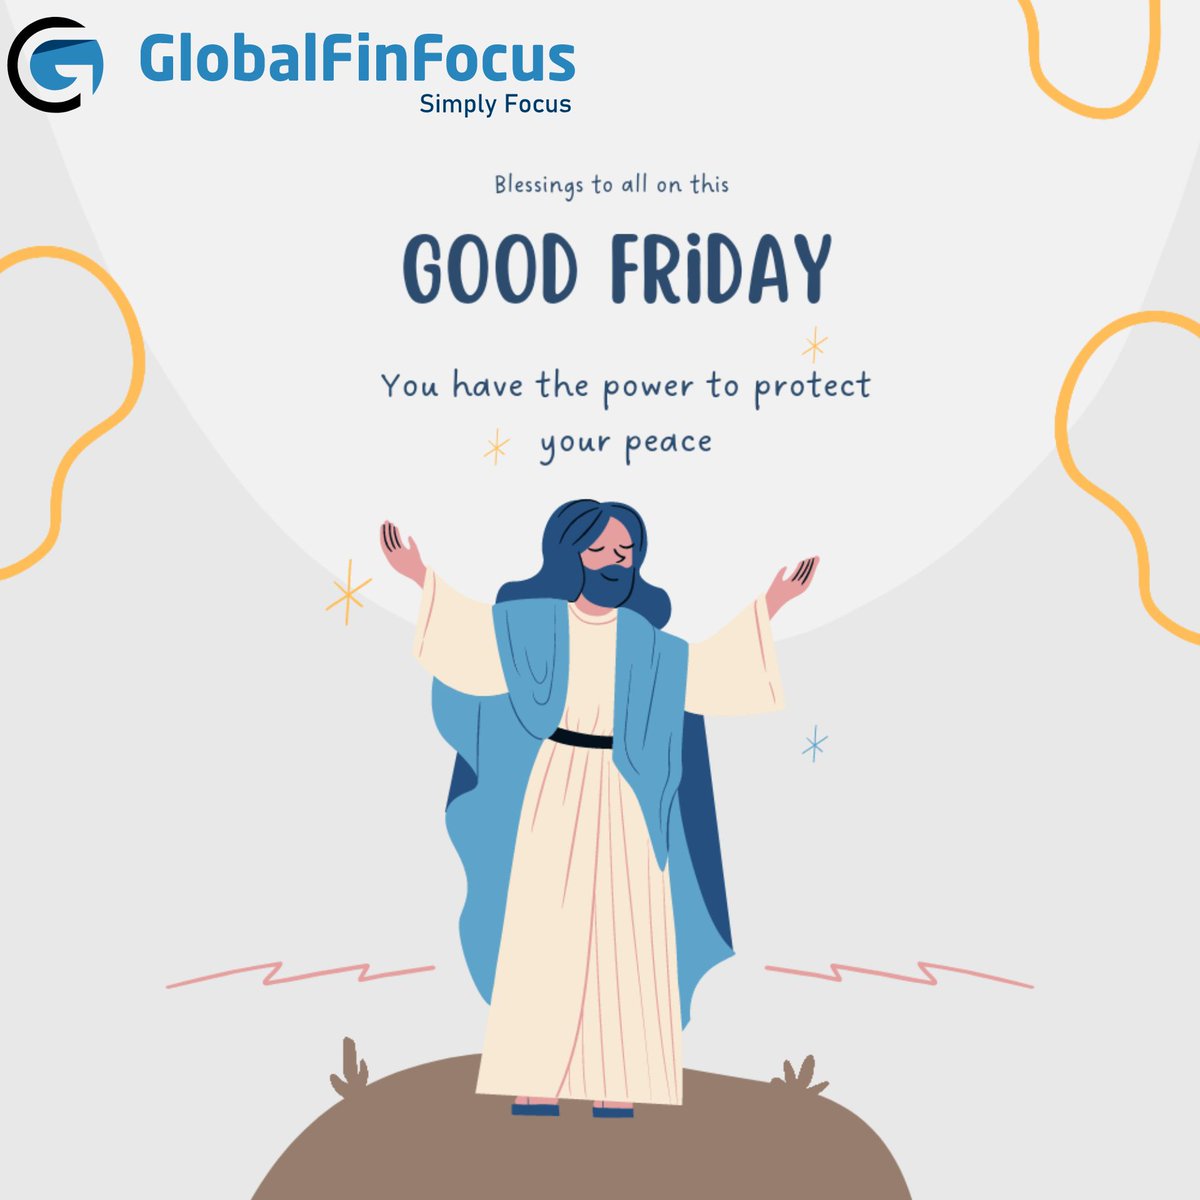 May the significance of this Good Friday fill your heart with peace and gratitude.

#BusinessIntelligence #GlobalFinFocus #accounting #BookkeepingSolutions #CPAStressRelief #automation #goodfriday #Efficiency #Innovation #OutsourceAccounting #Efficiency #Expertise #CostSavings